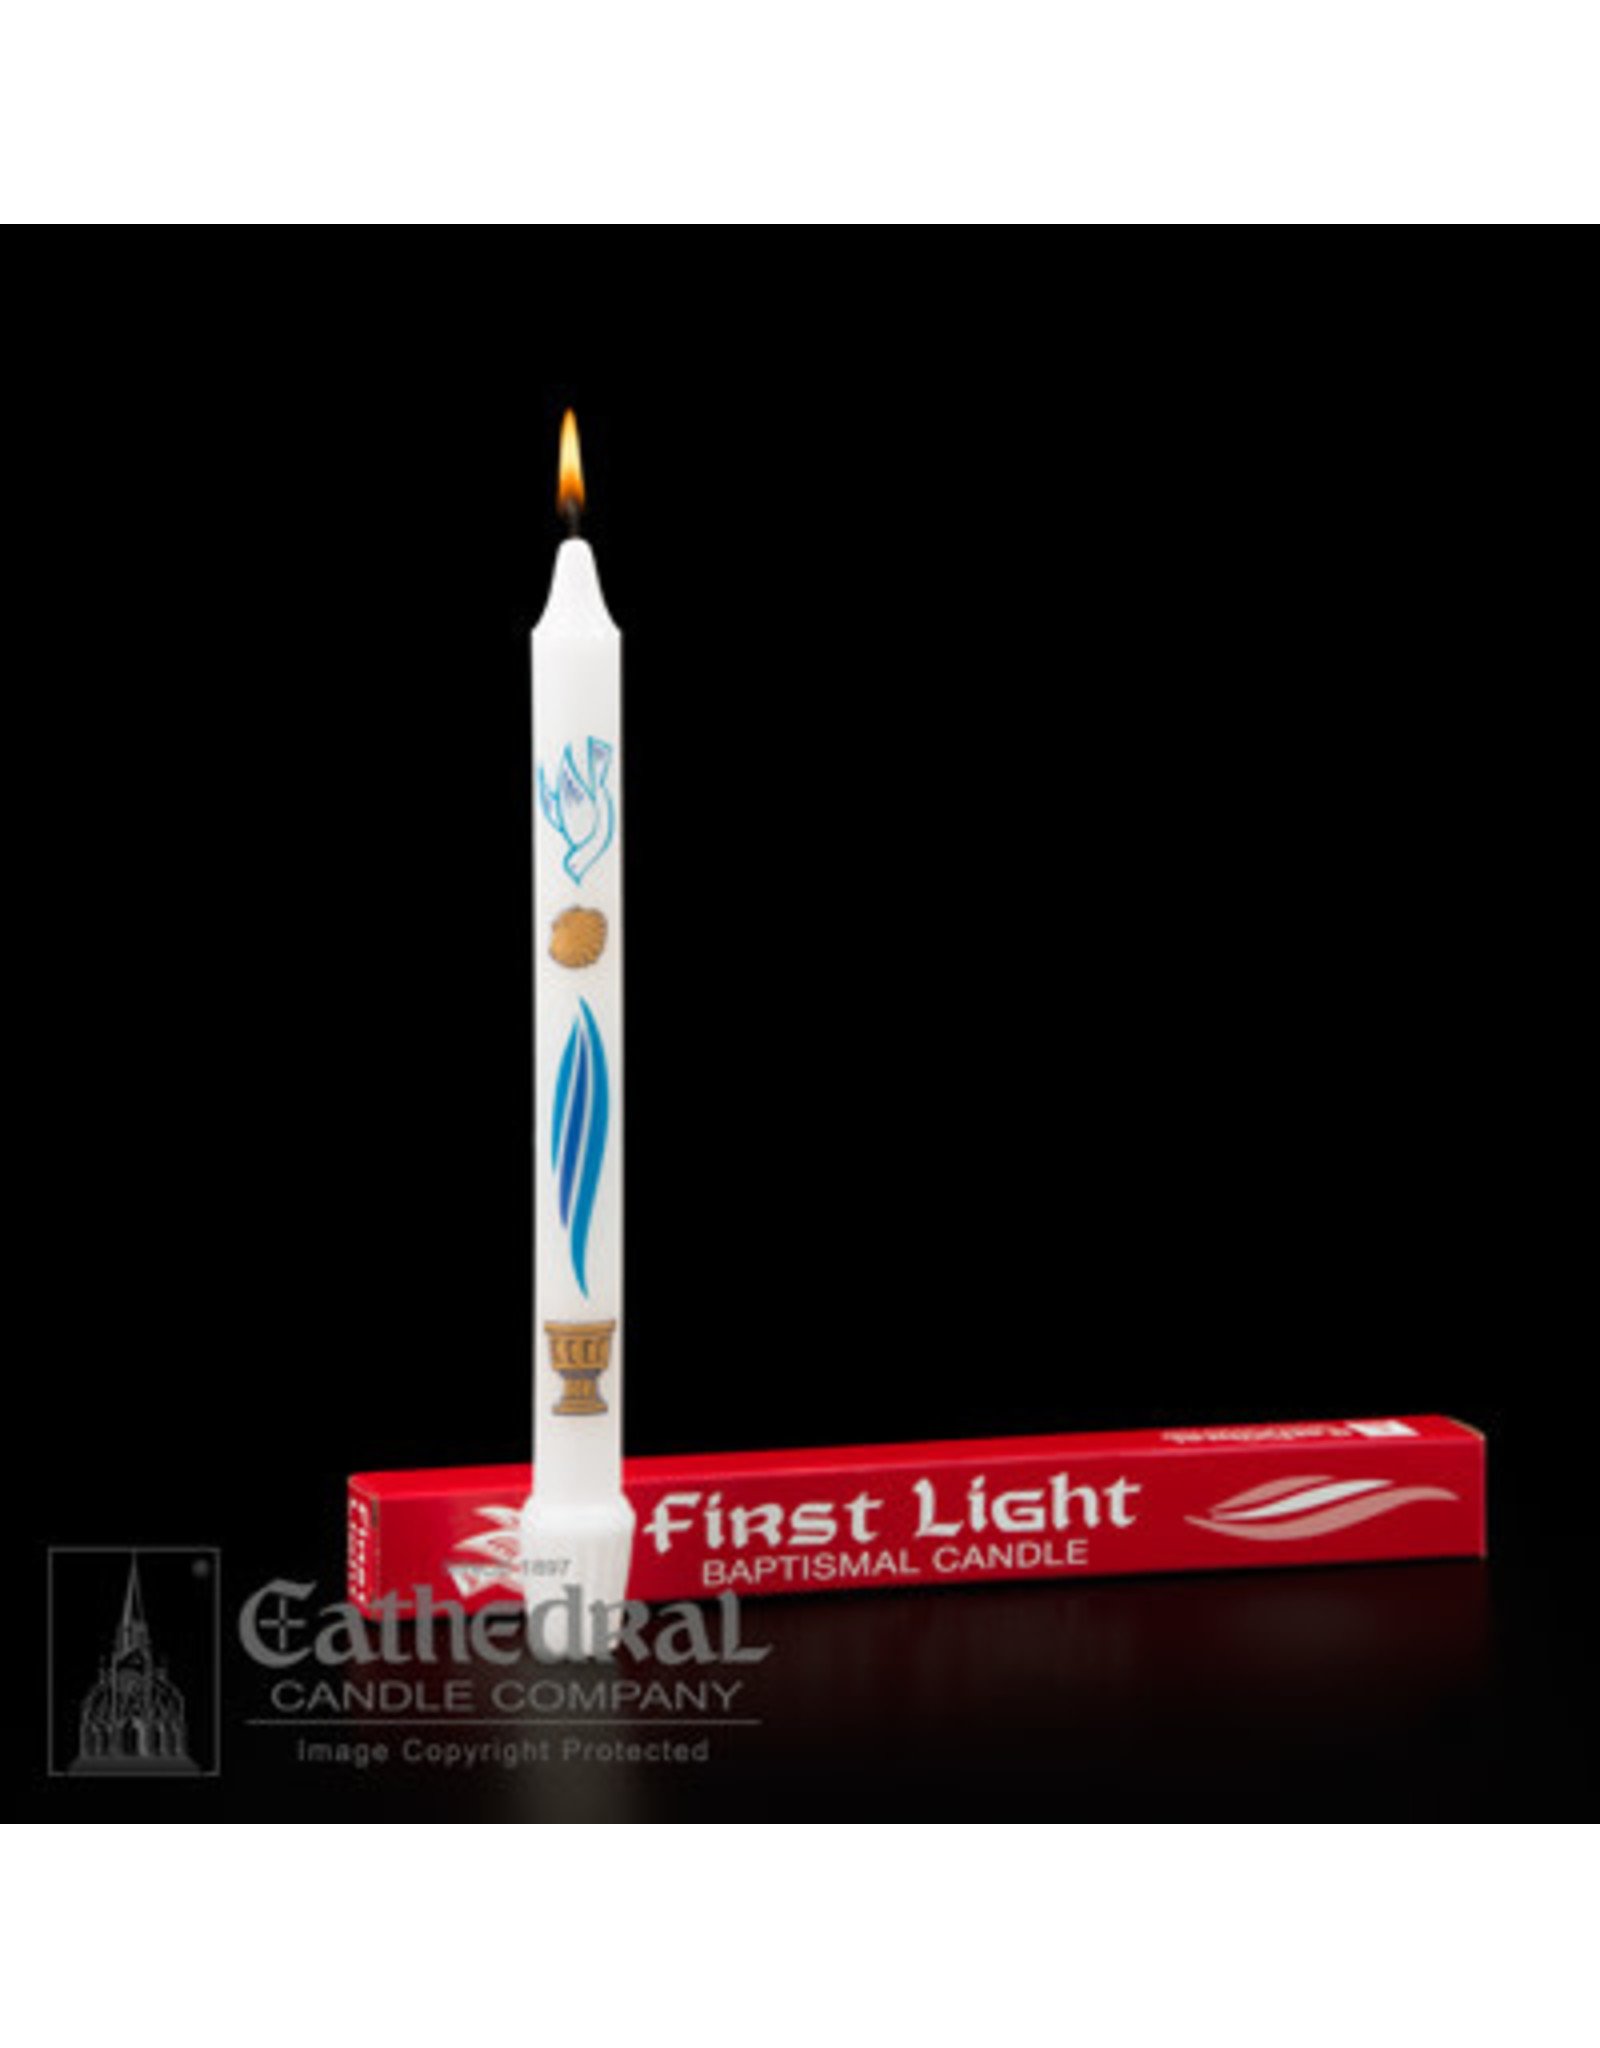 Cathedral Candle First Light Baptism Candle